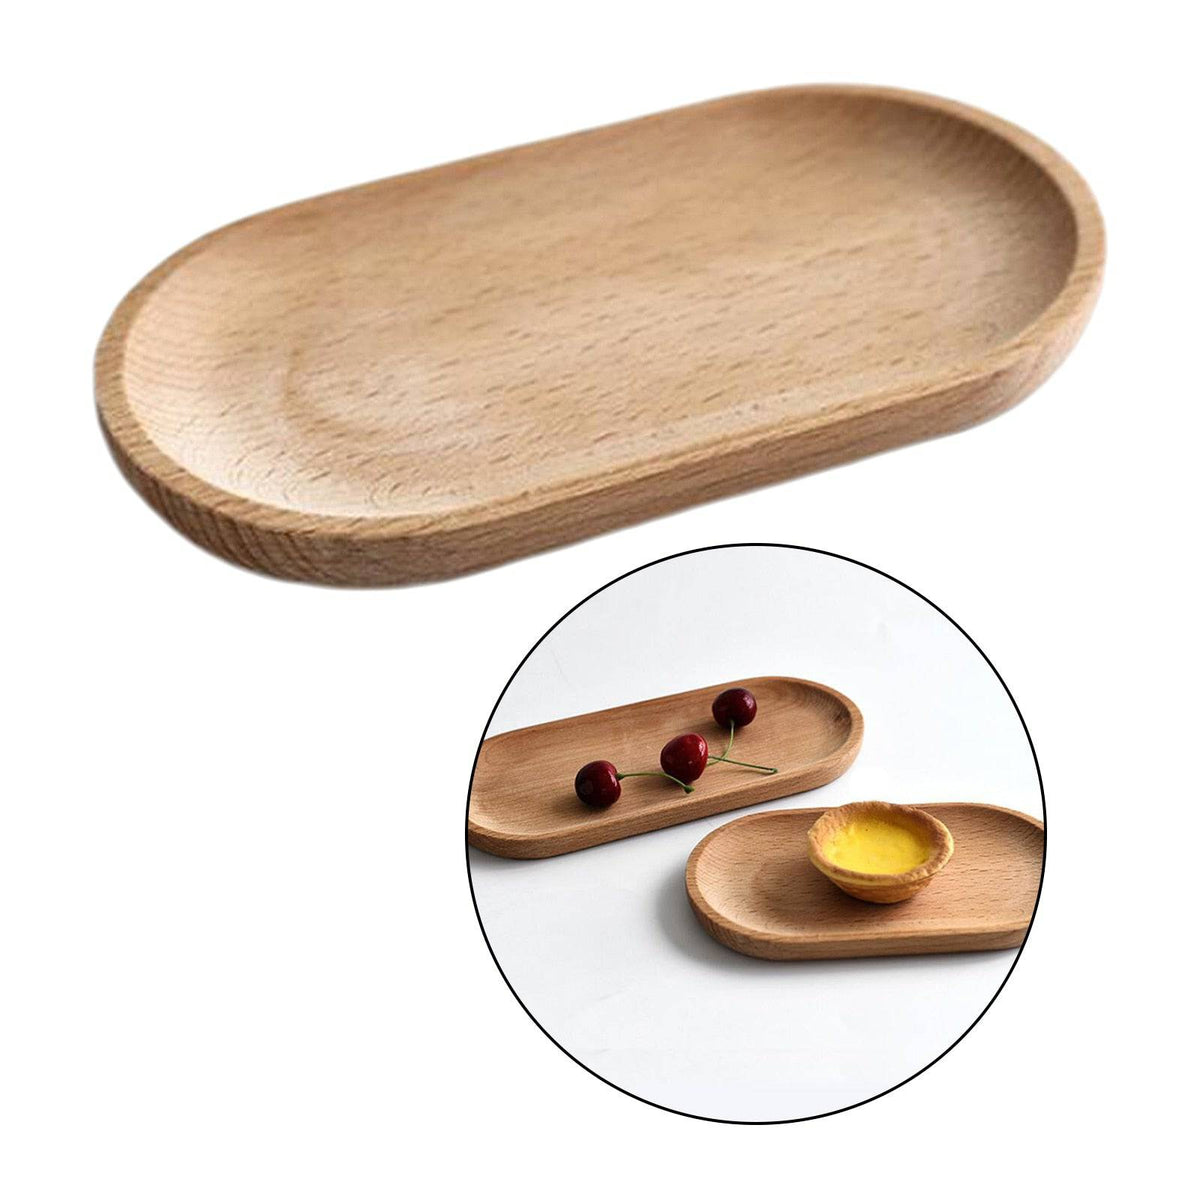 Oval Wooden Tea Tray Serving Table Plate Snacks Food Storage Dish for Tray Fruit Dishes Saucer Dessert Serving Tray Bamboo Tray - Culinarywellbeing